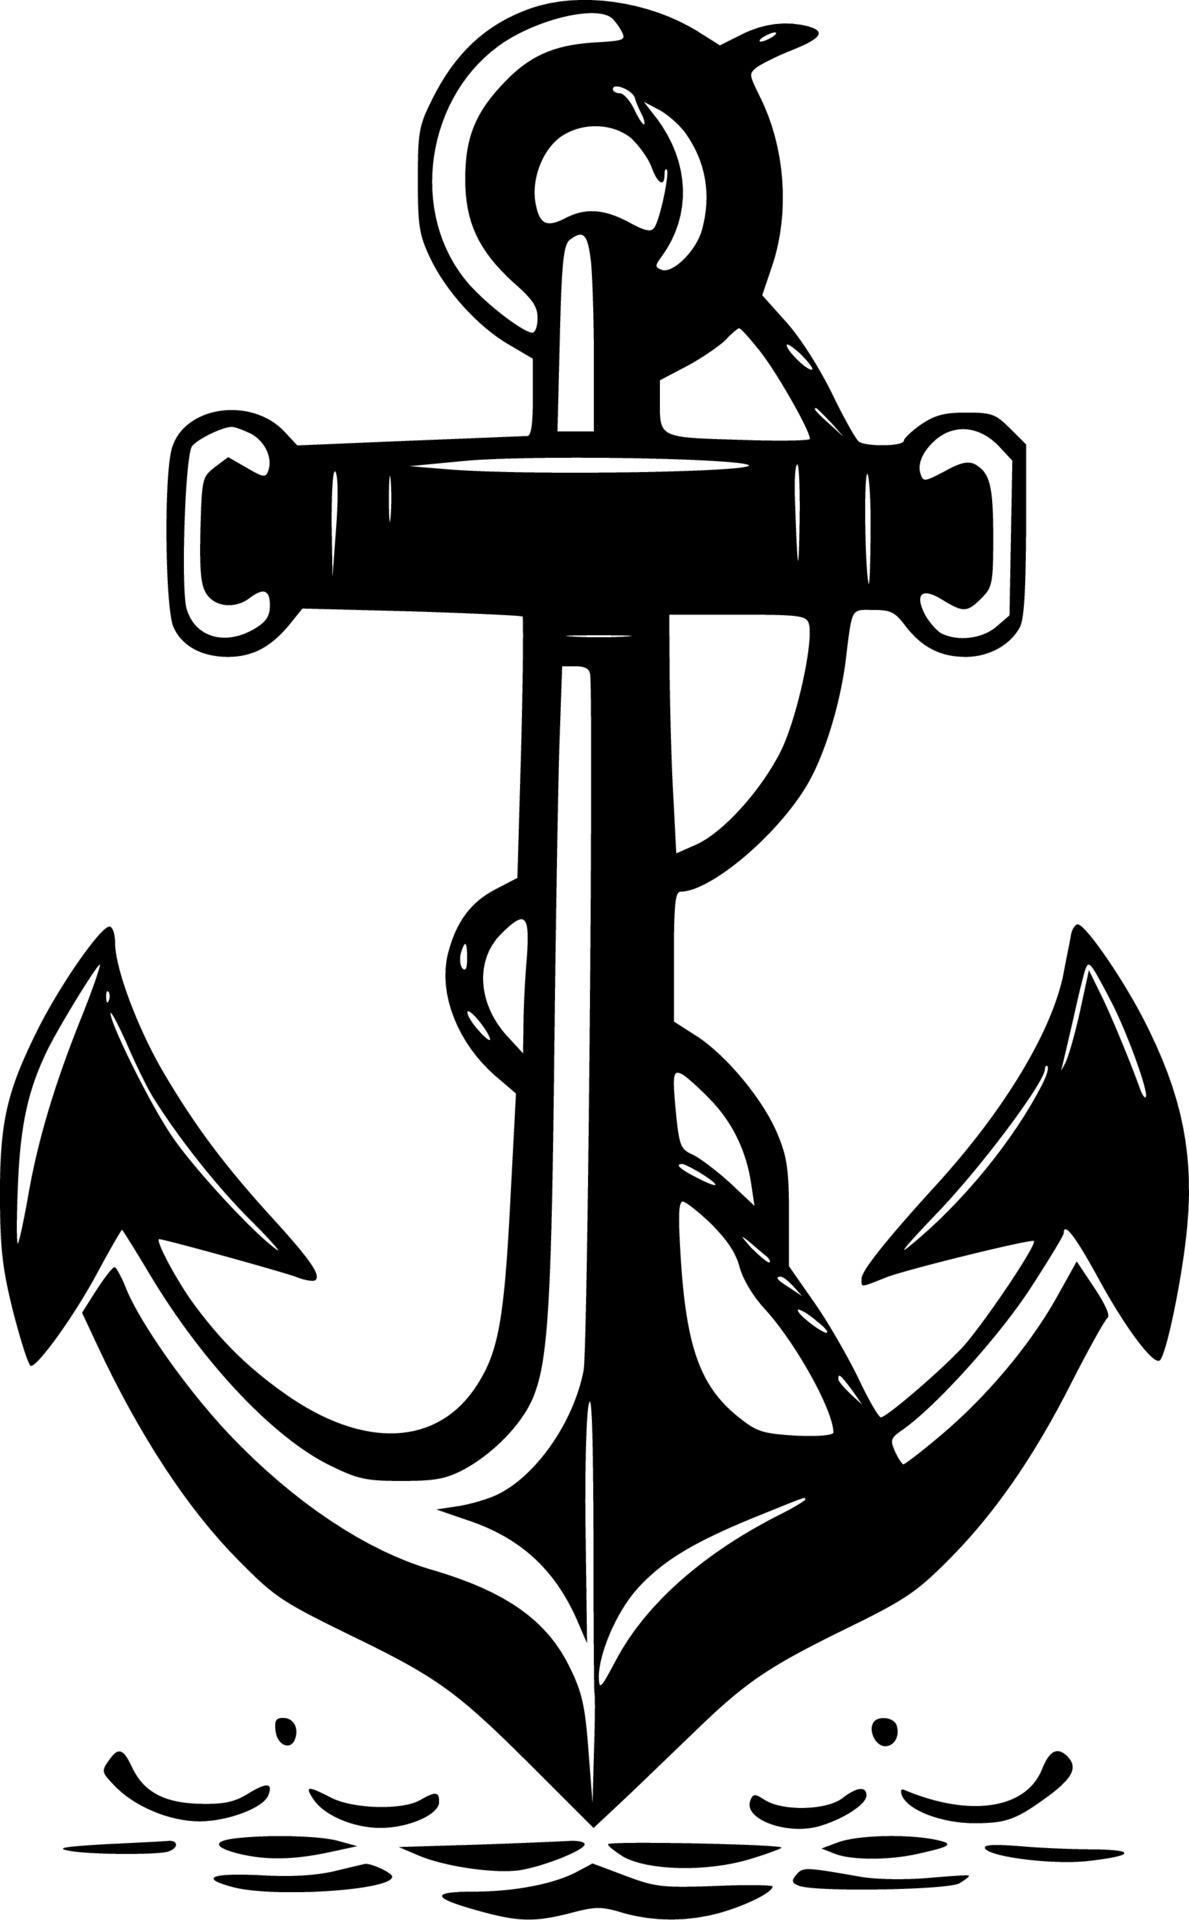 Anchor - High Quality Vector Logo - Vector illustration ideal for T ...